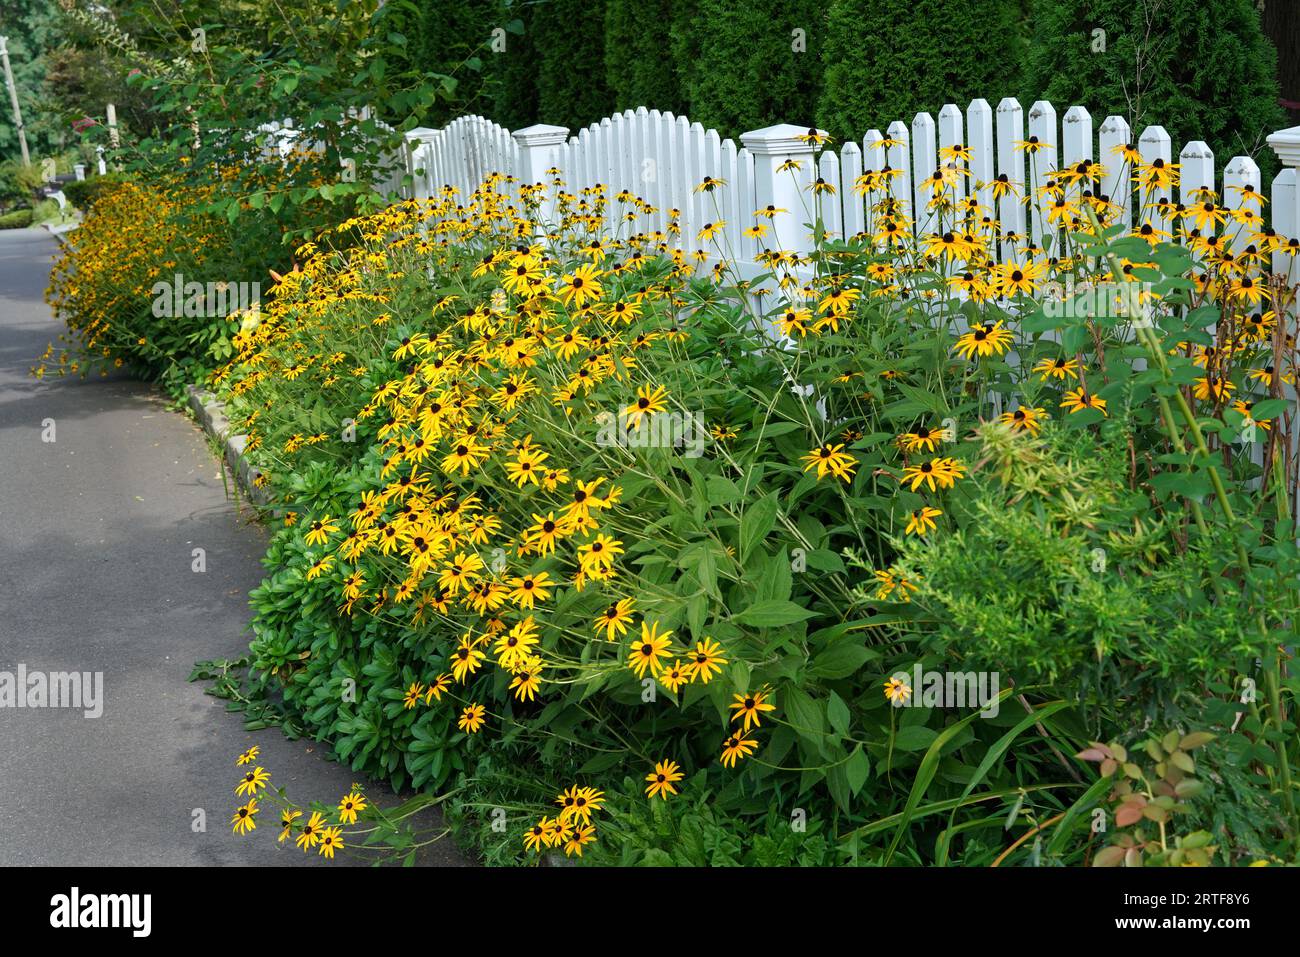 White fence on suburban street with bright yellow coneflowers known as brown-eyed susans Stock Photo